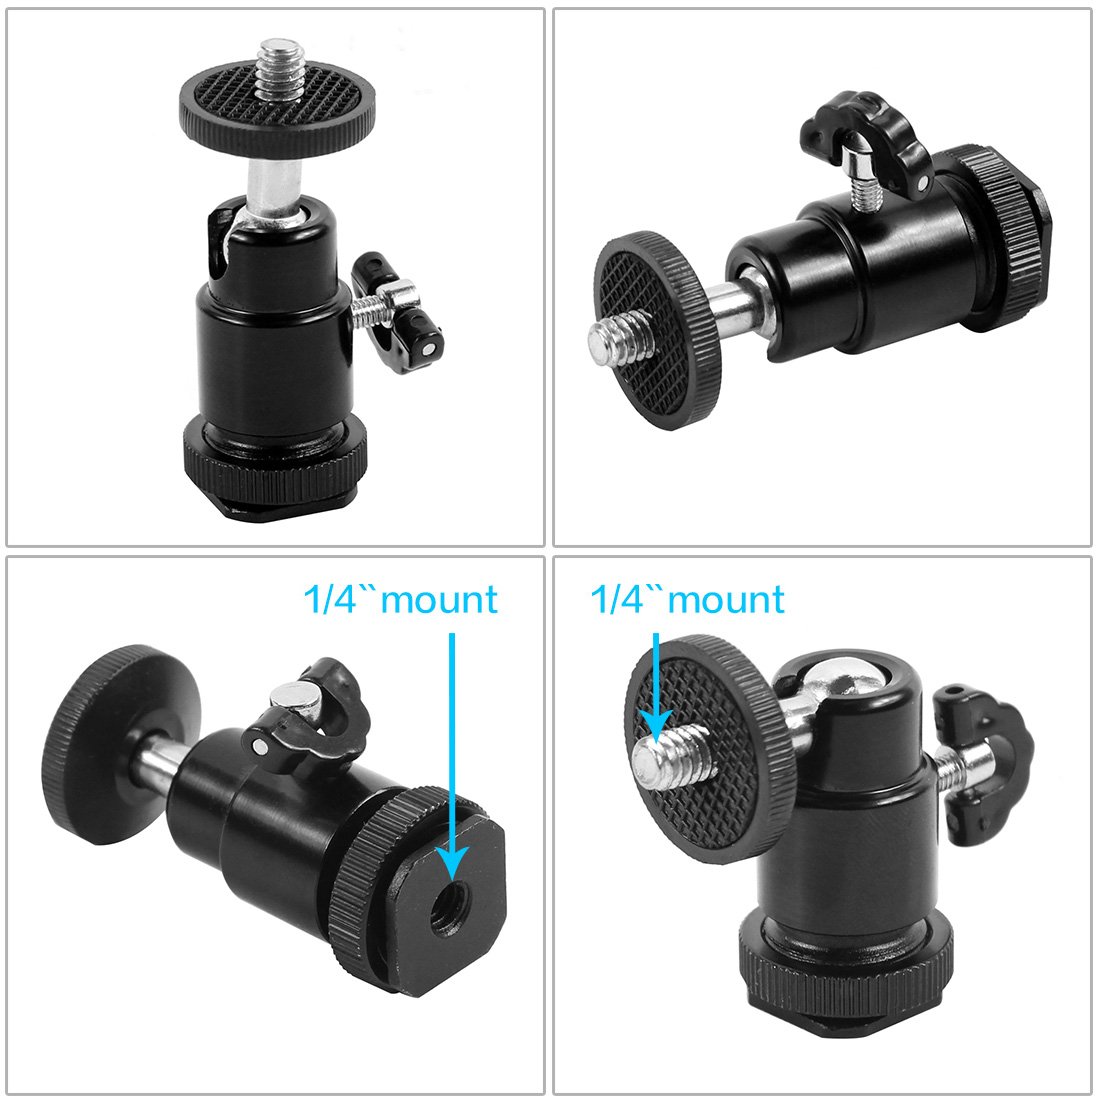 1/4 Screw Mini Ball Head Tripod Mount Light Flash Stand Holder BallHead with Crab Claws Clamp For SLR Camera Monitor Accessories